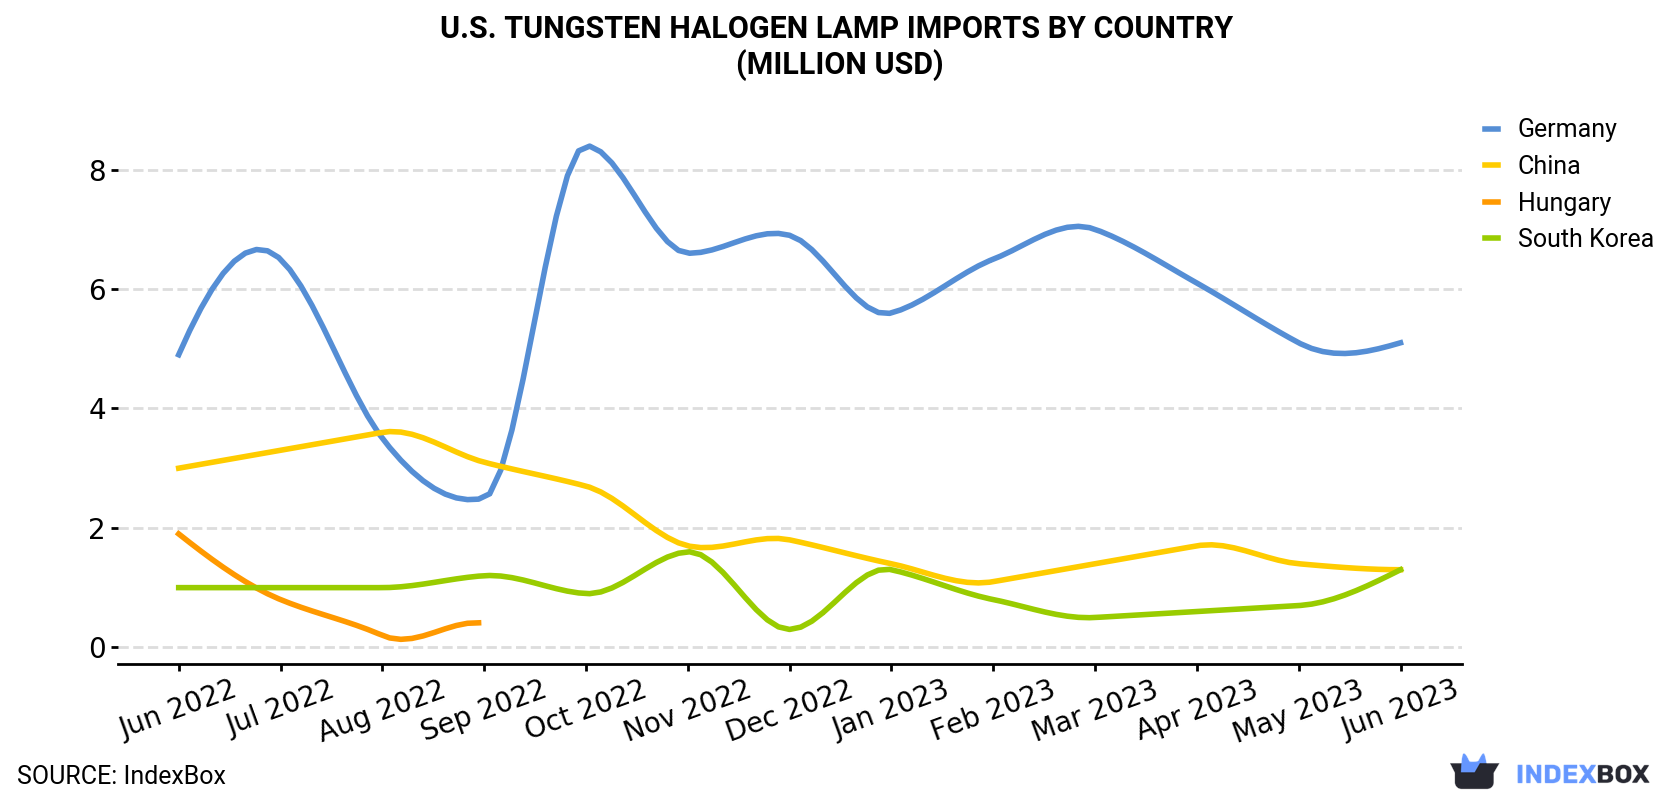 U.S. Tungsten Halogen Lamp Imports By Country (Million USD)